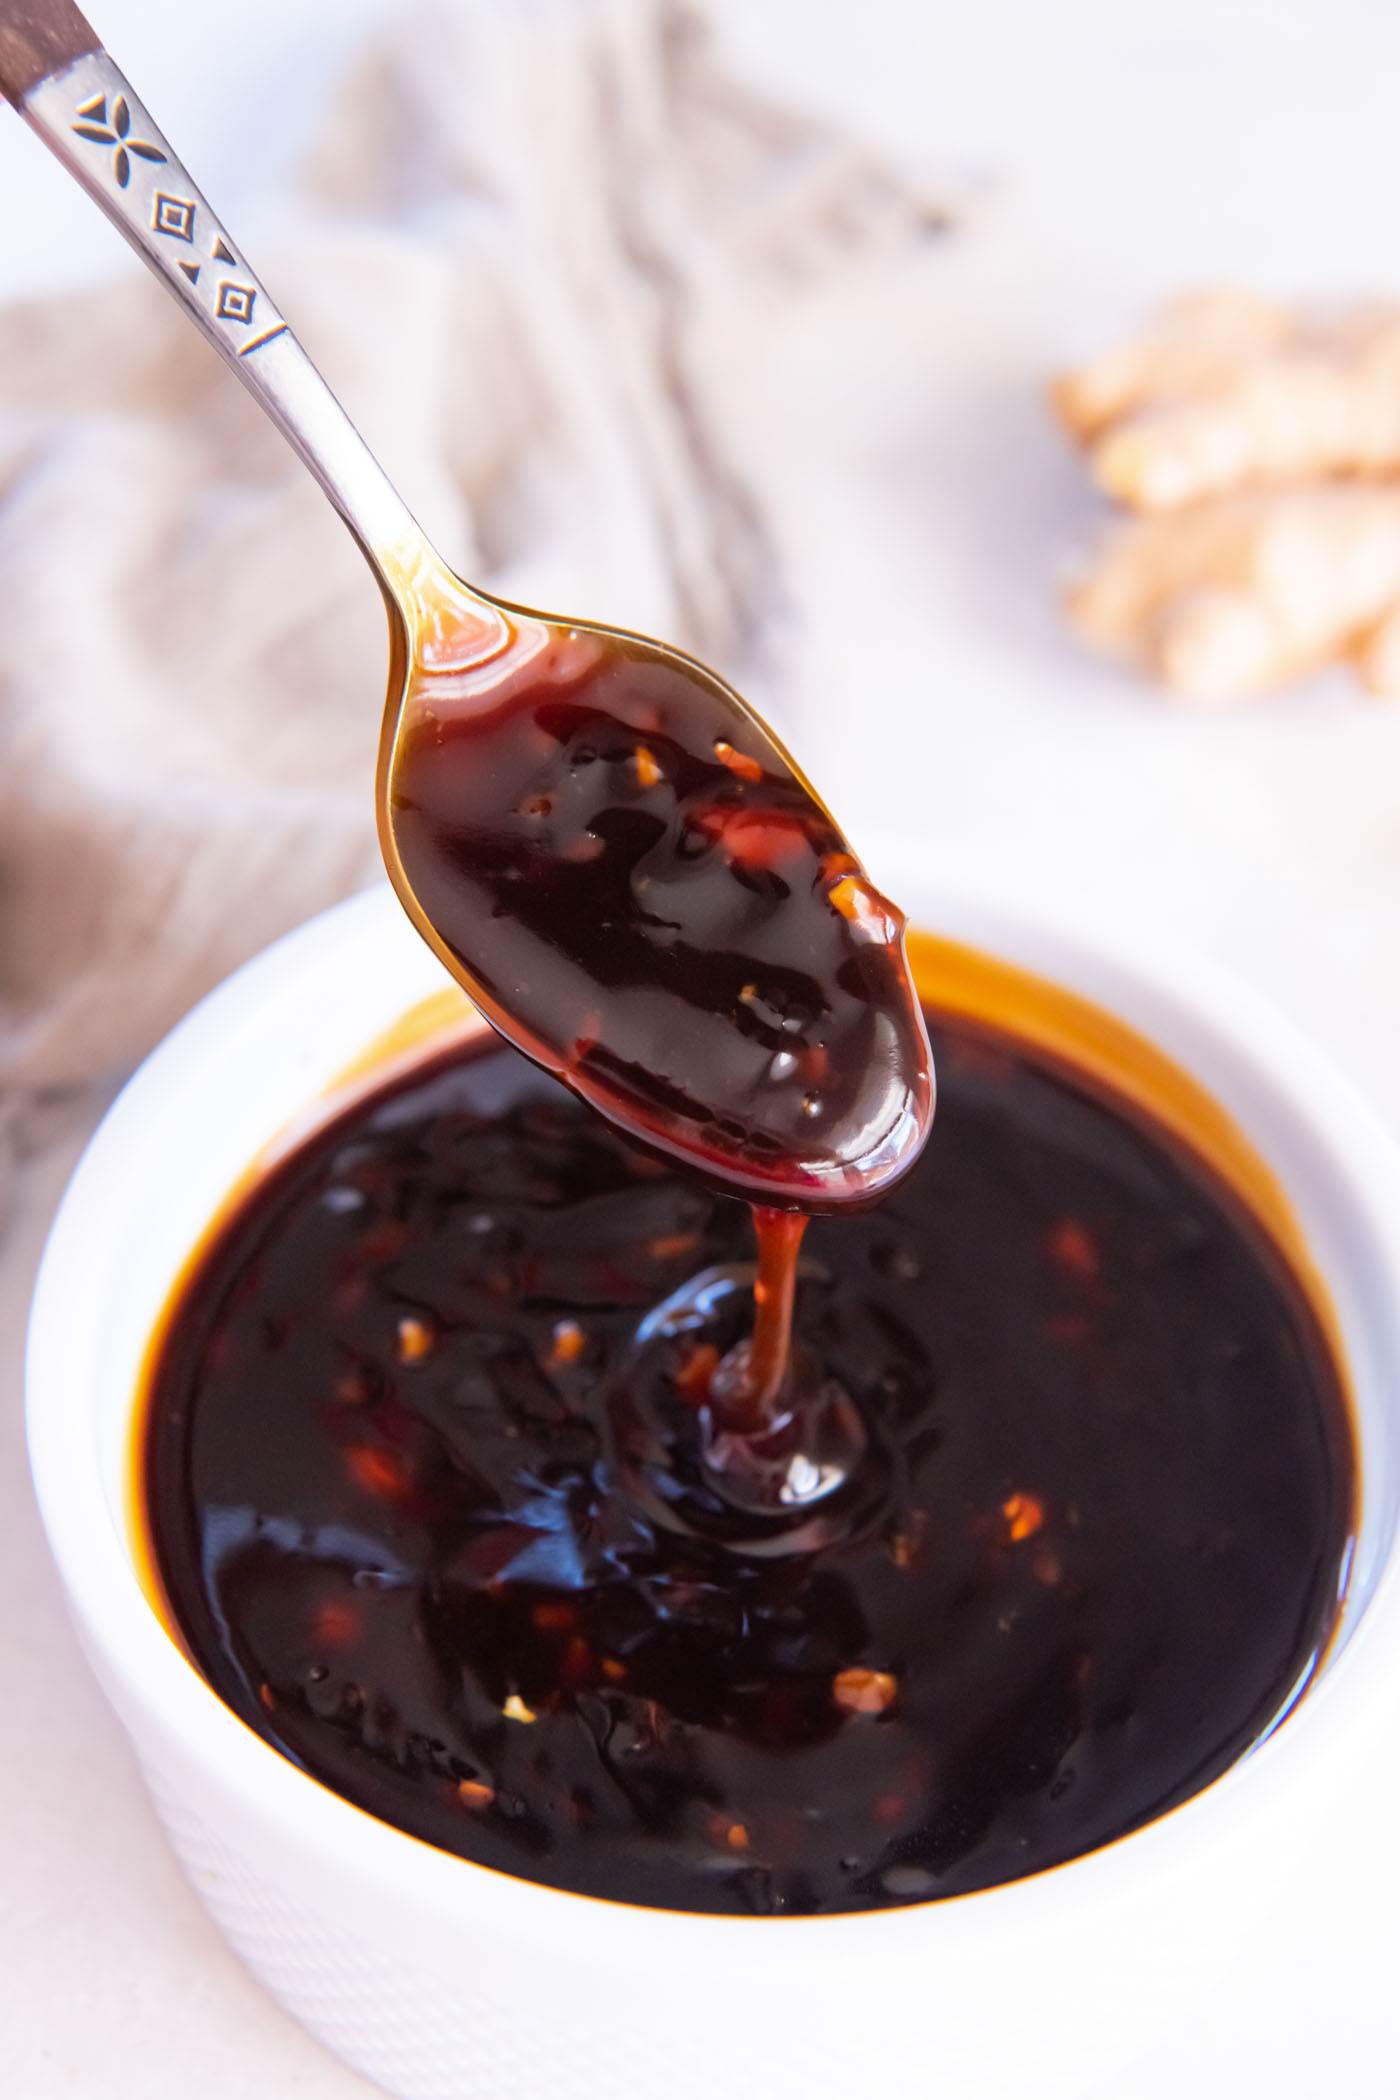 Teriyaki sauce dripping from spoon into bowl of sauce.